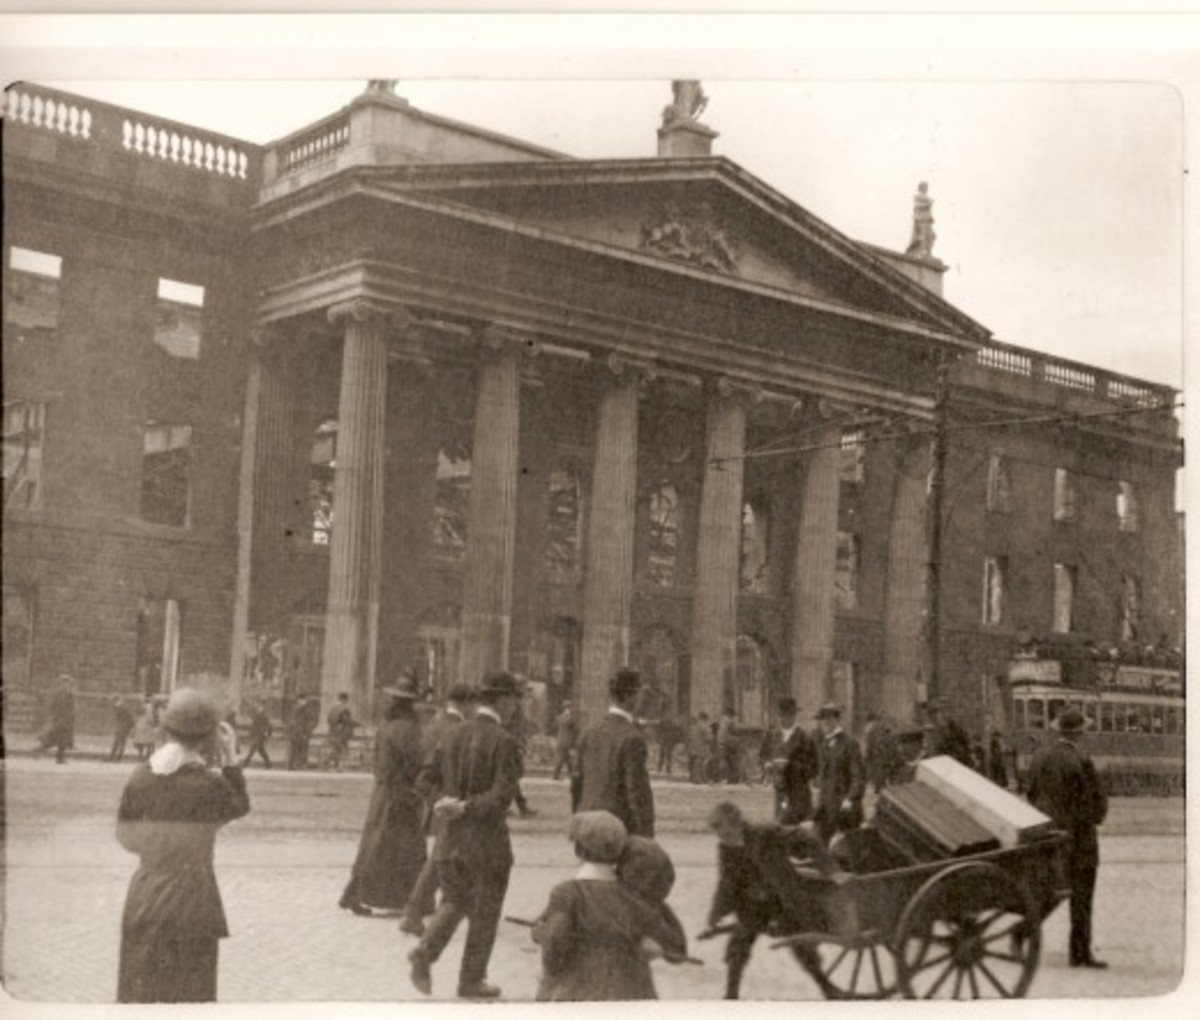 Burnt out GPO after the Irish Rising